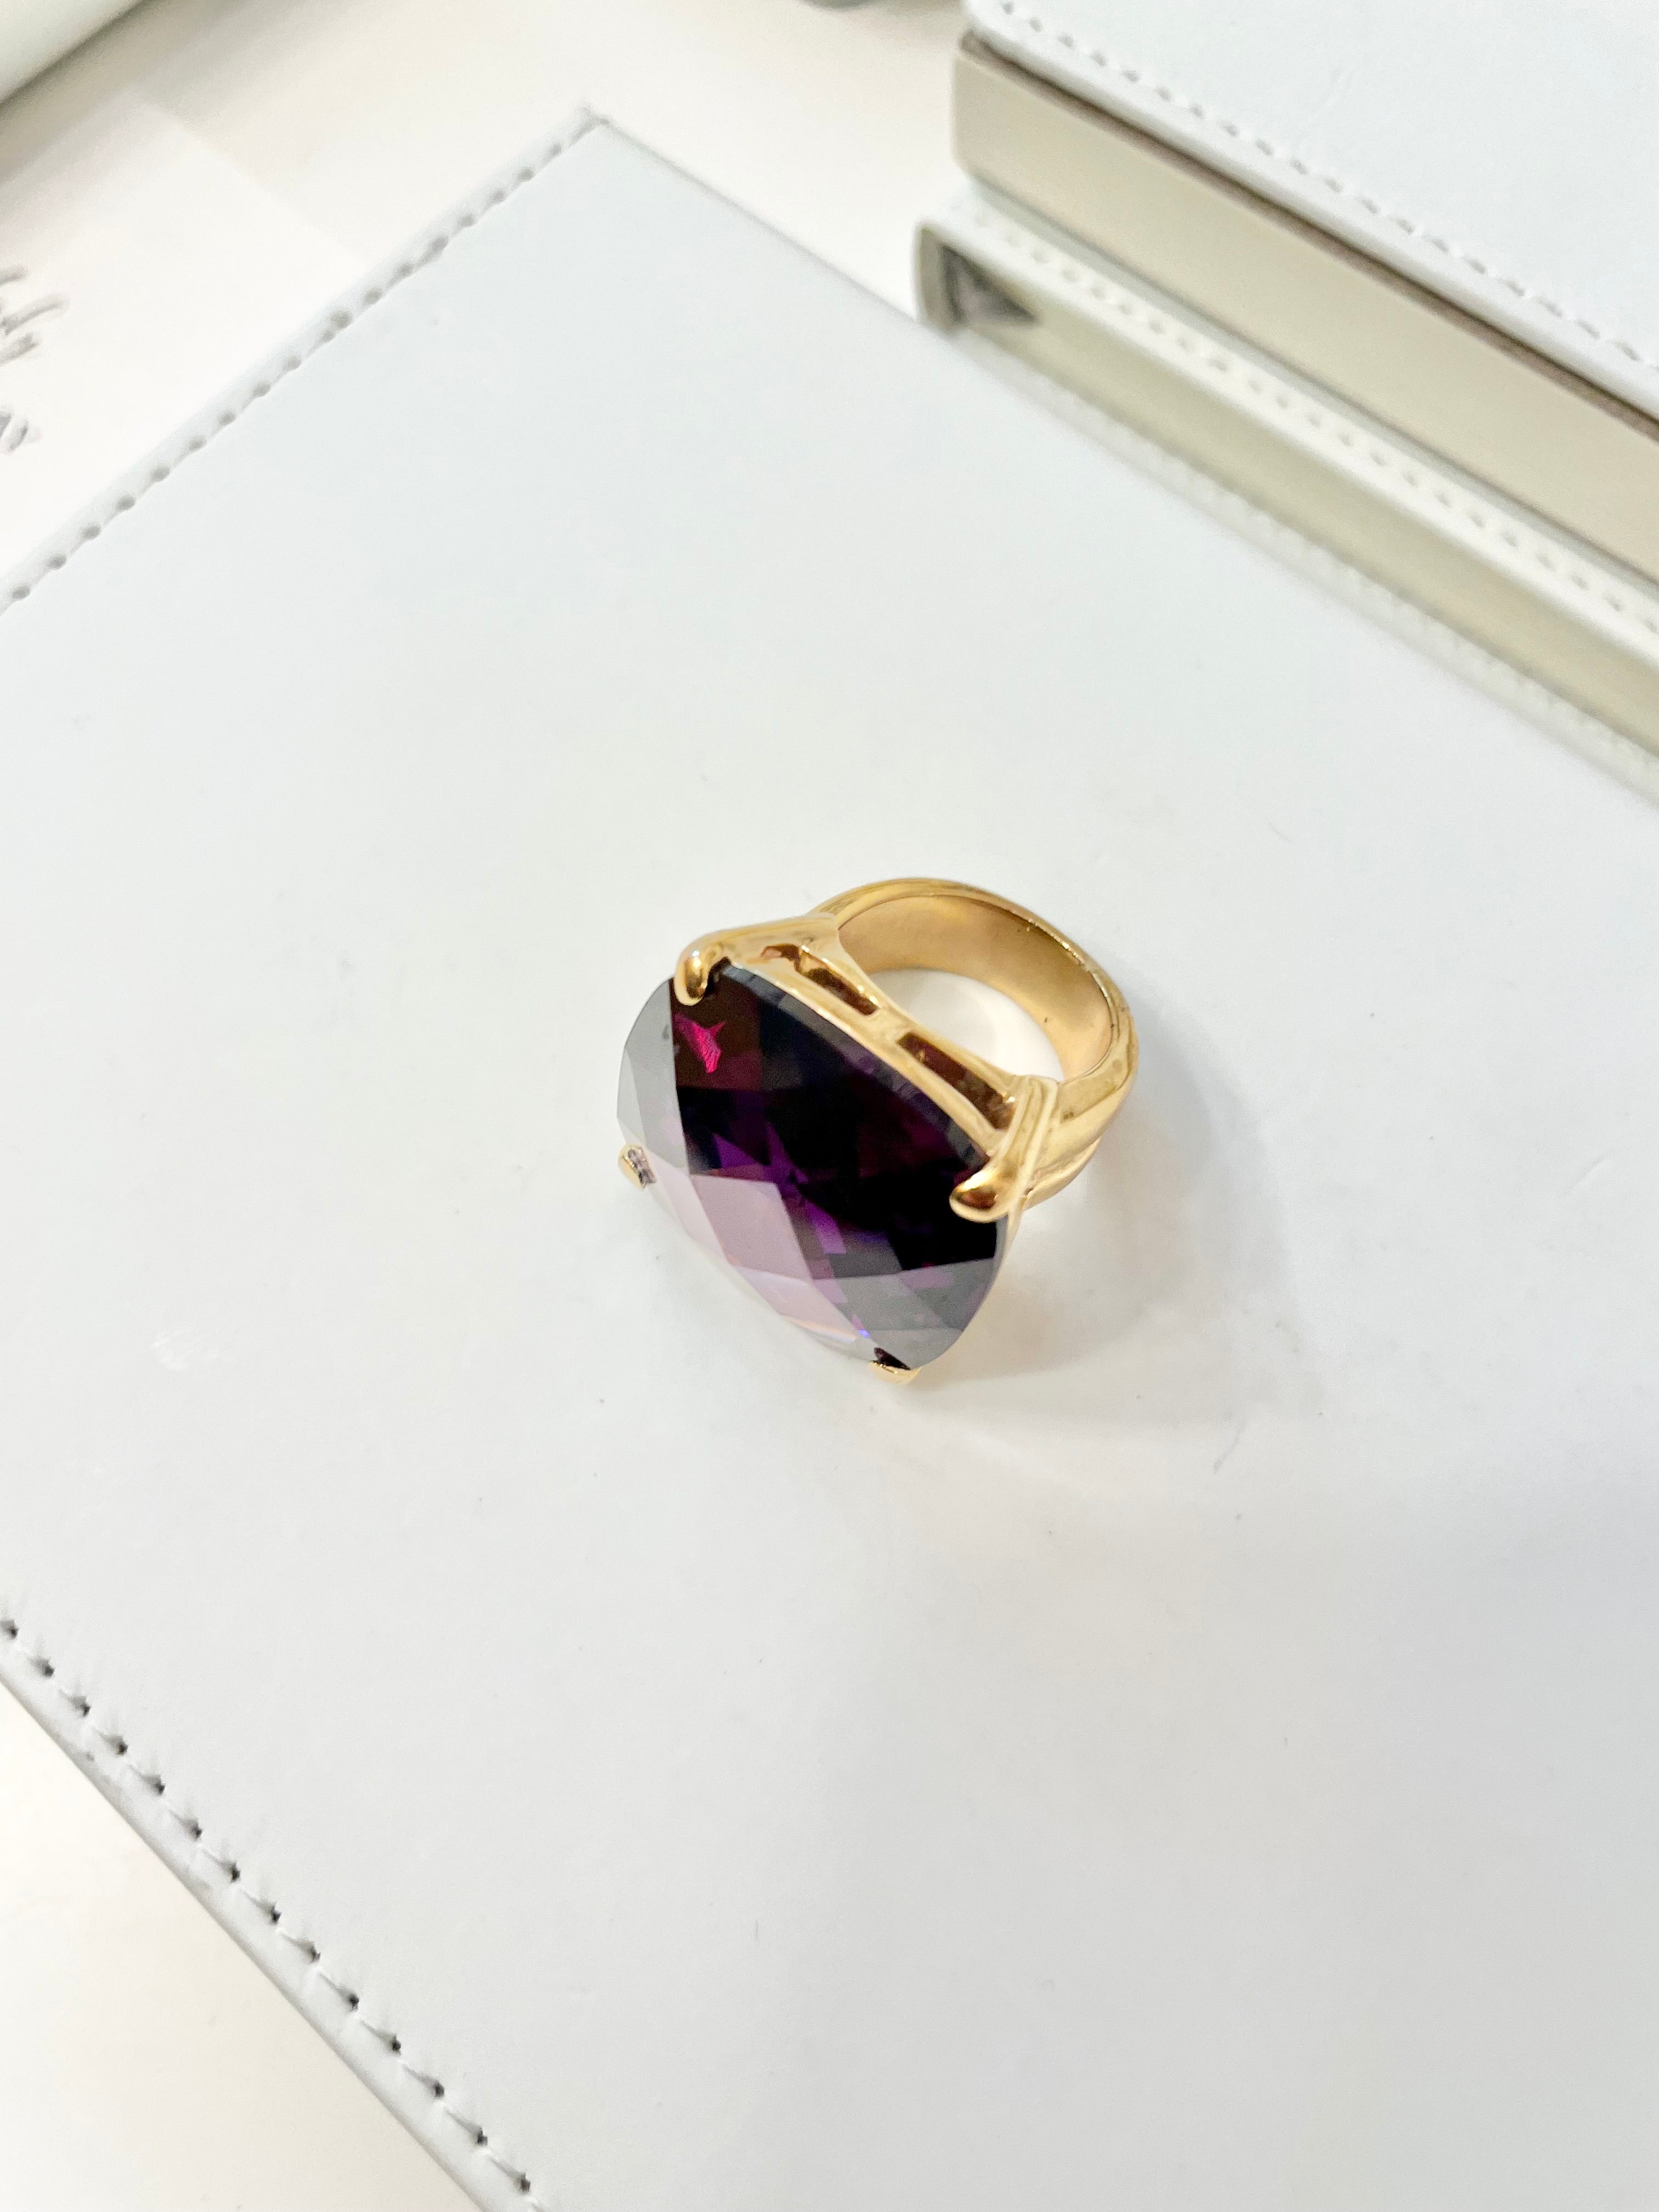 Vintage Martini cocktail ring, a rich hue of deep purple, faceted, and stunning!